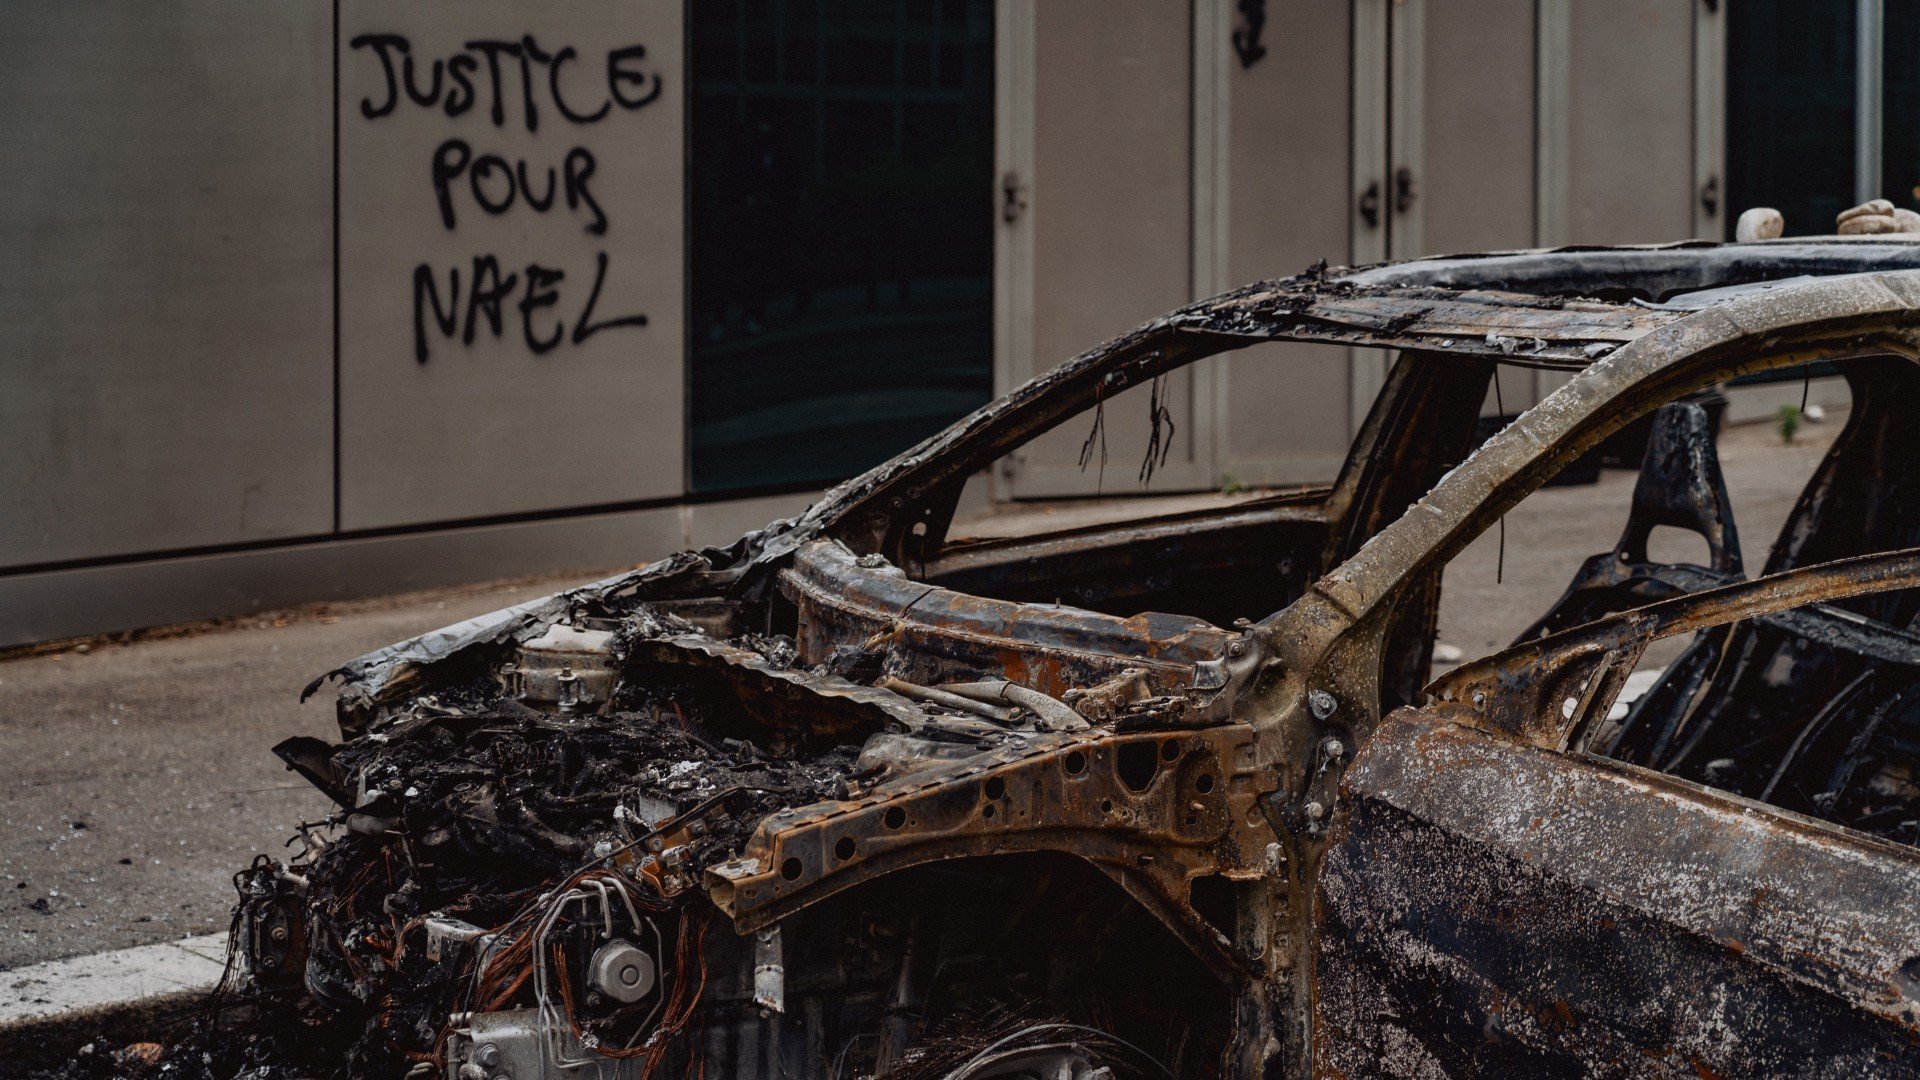 A torched car in Nanterre, 29 June (MEE/Alexandre Rito)